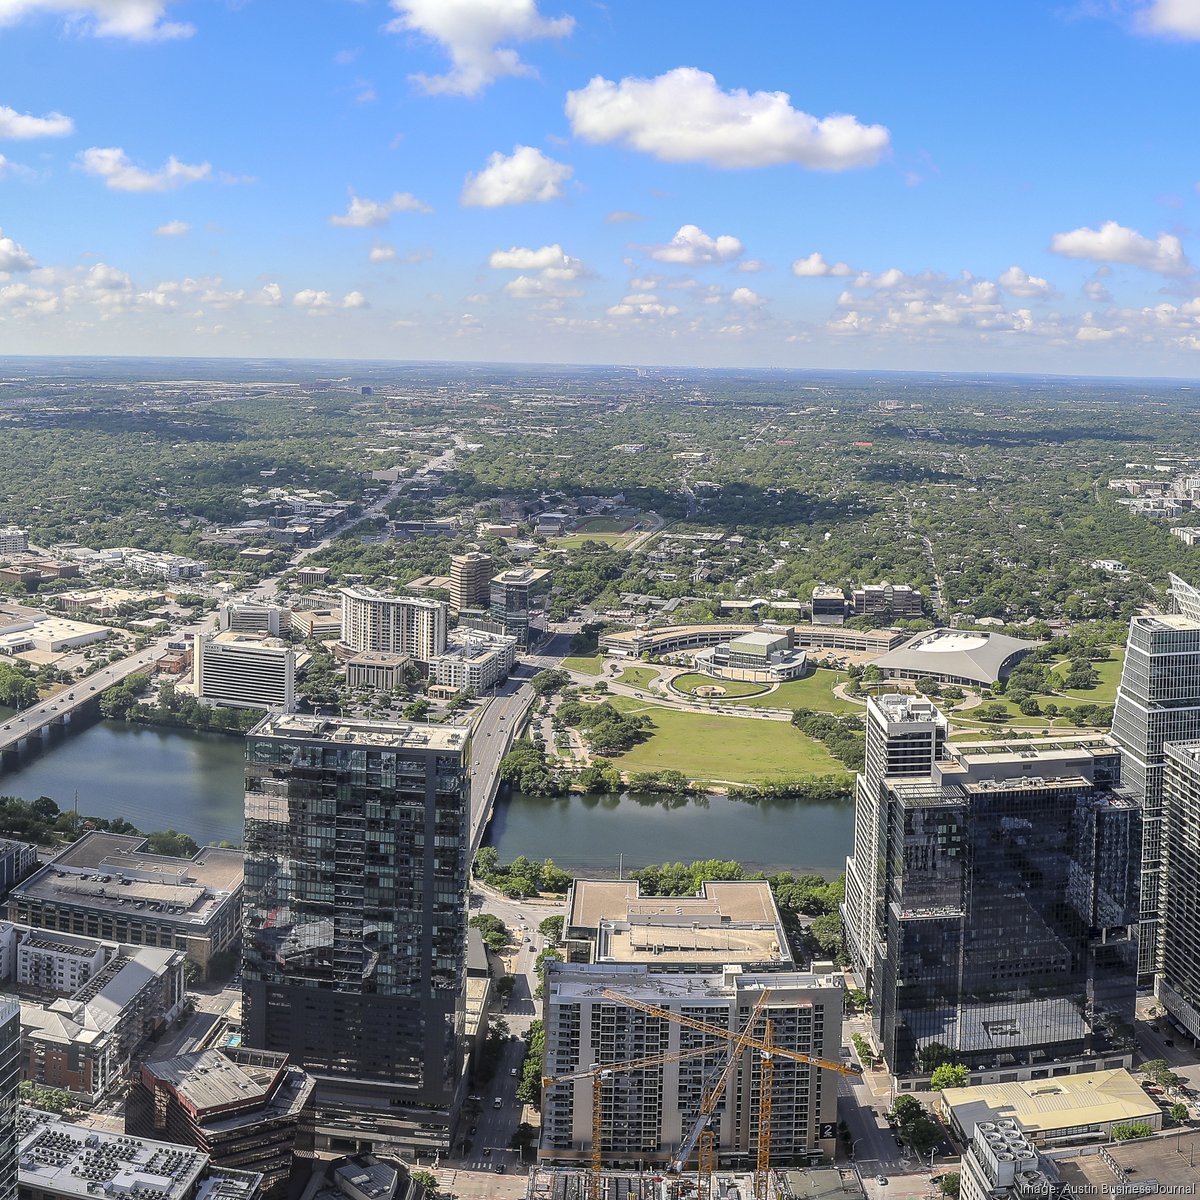 Domain-like' projects abound in Austin area - Austin Business Journal